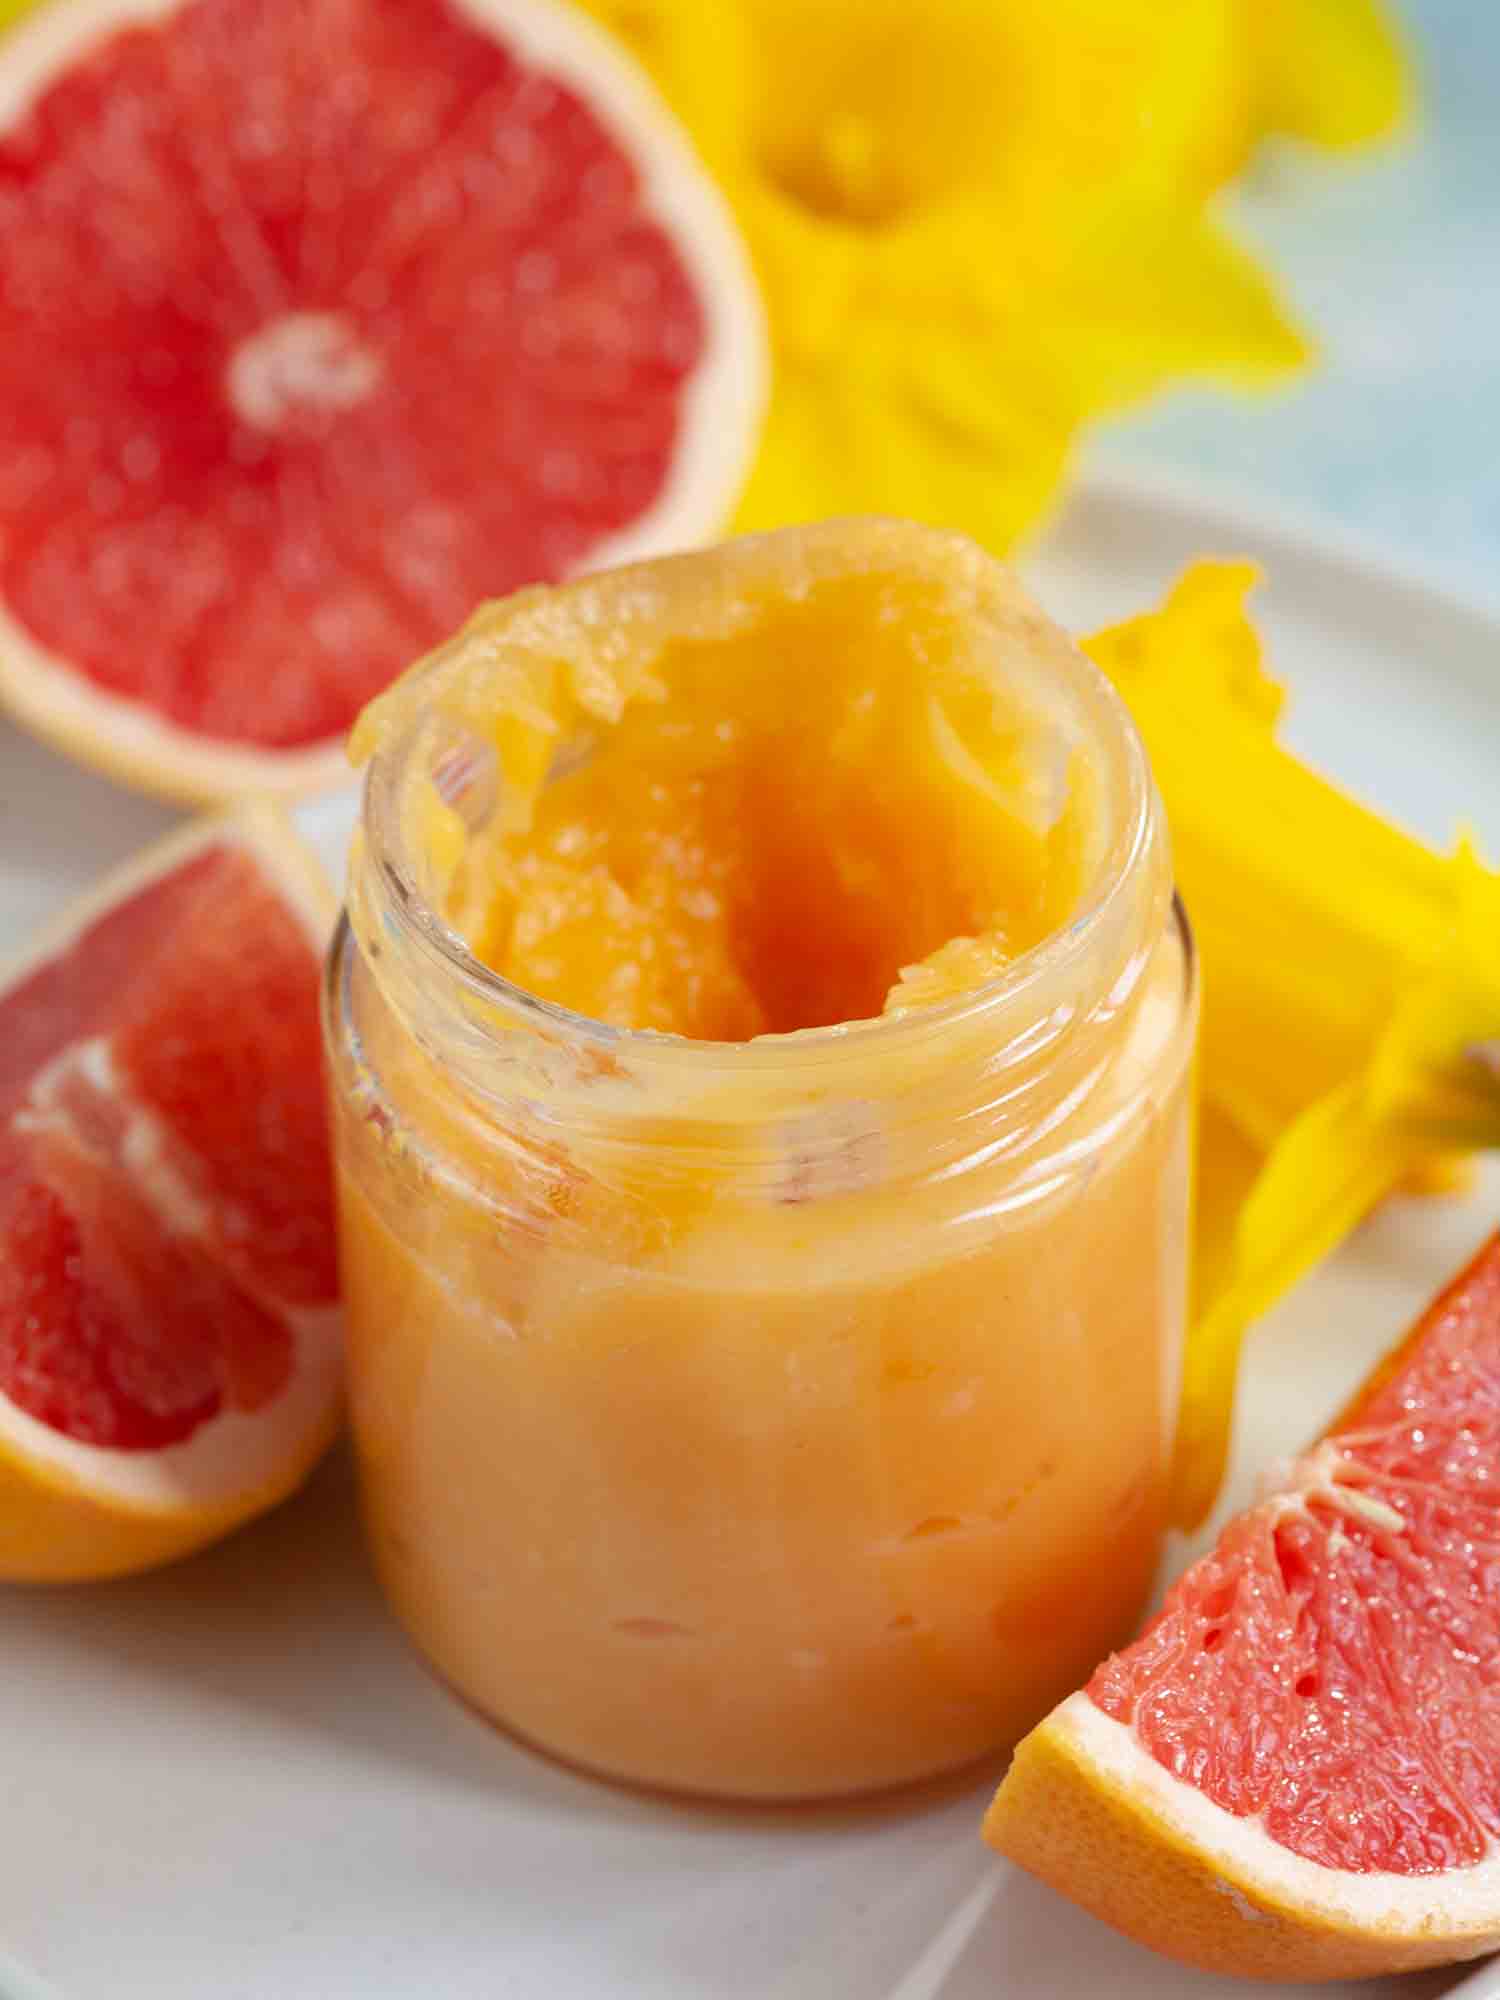 Ginger and grapefruit curd